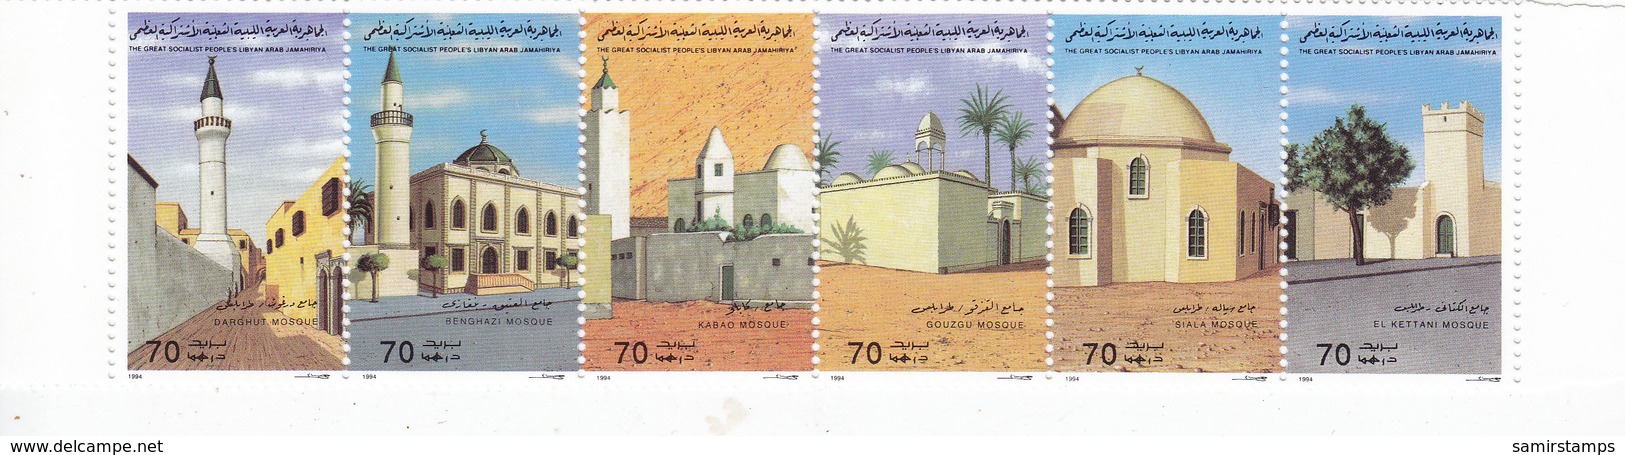 Libya 1984 Mosques Strip Of 6 Stamps Complete Set MNH- Reduced Price - SKRILL PAY ONLY - Libya